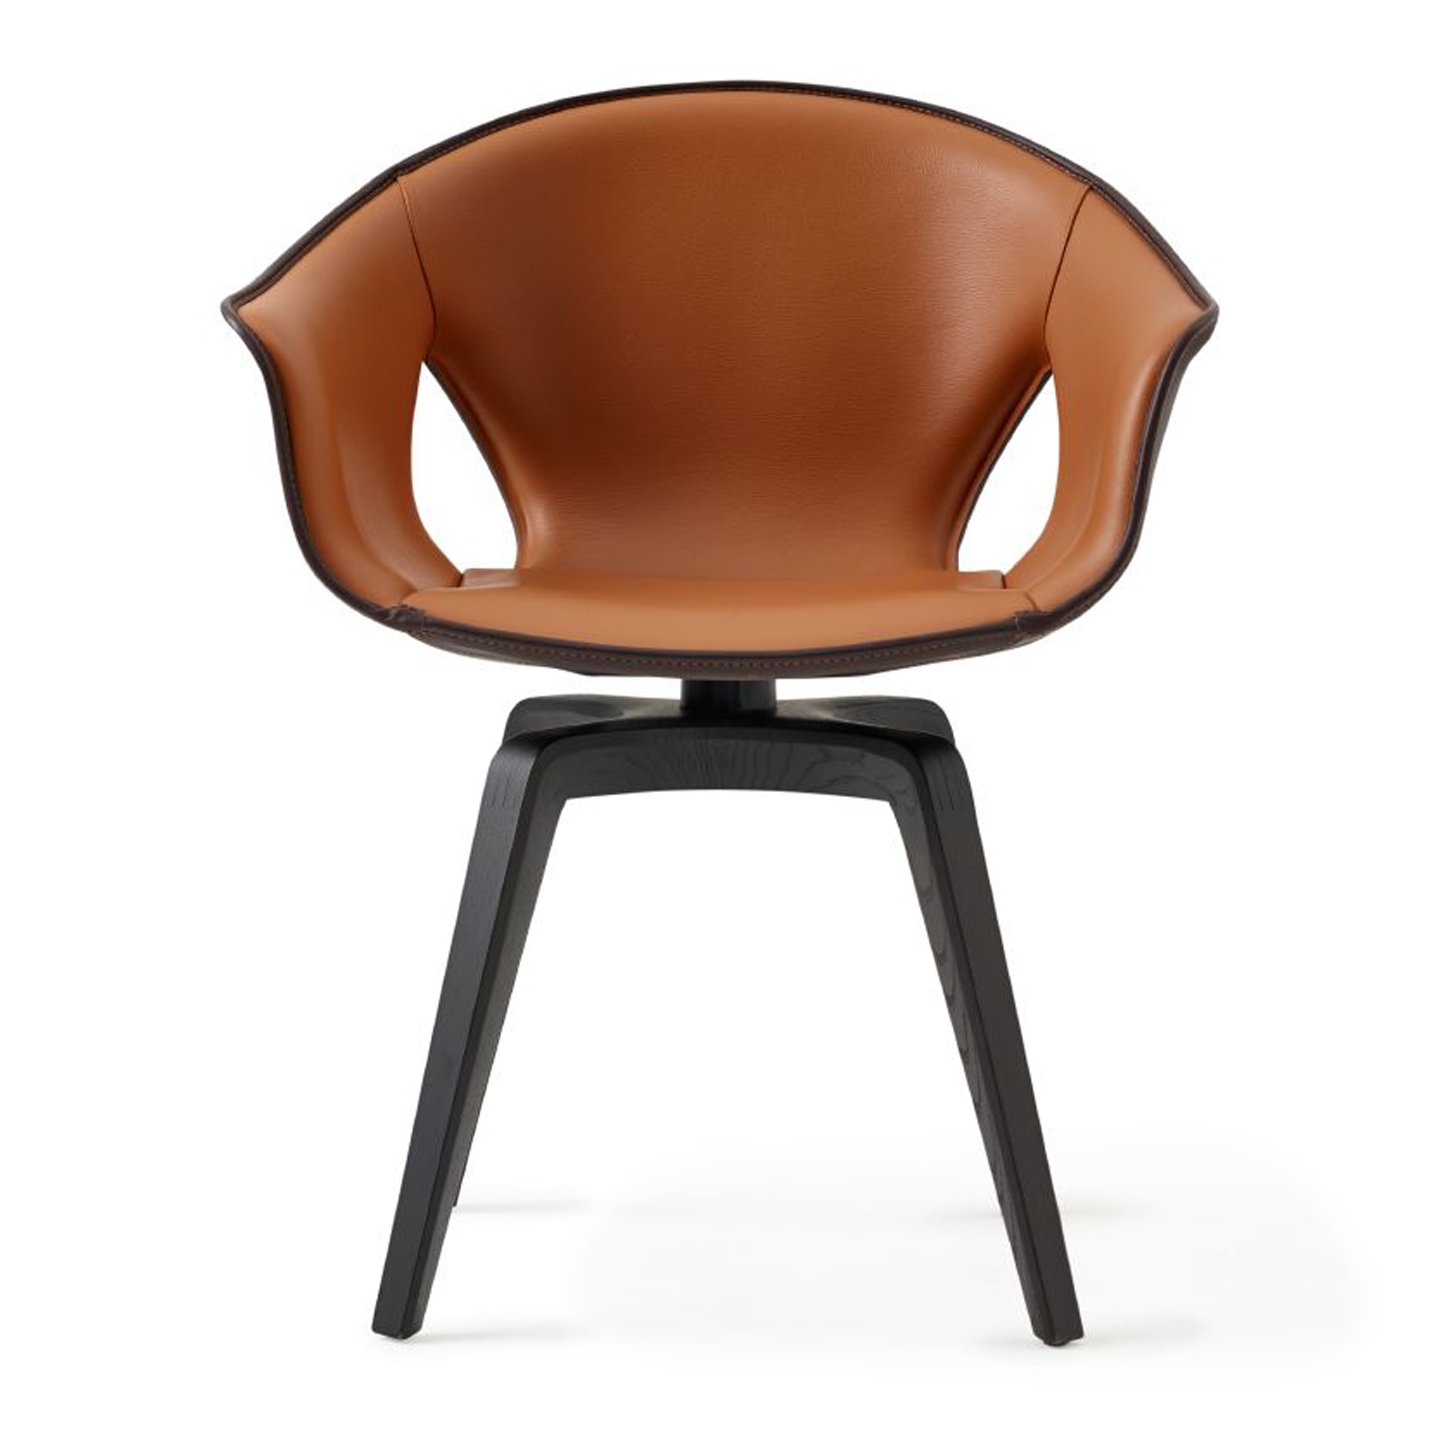 Haworth Ginger chair in orange upholstery and brown exterior front view